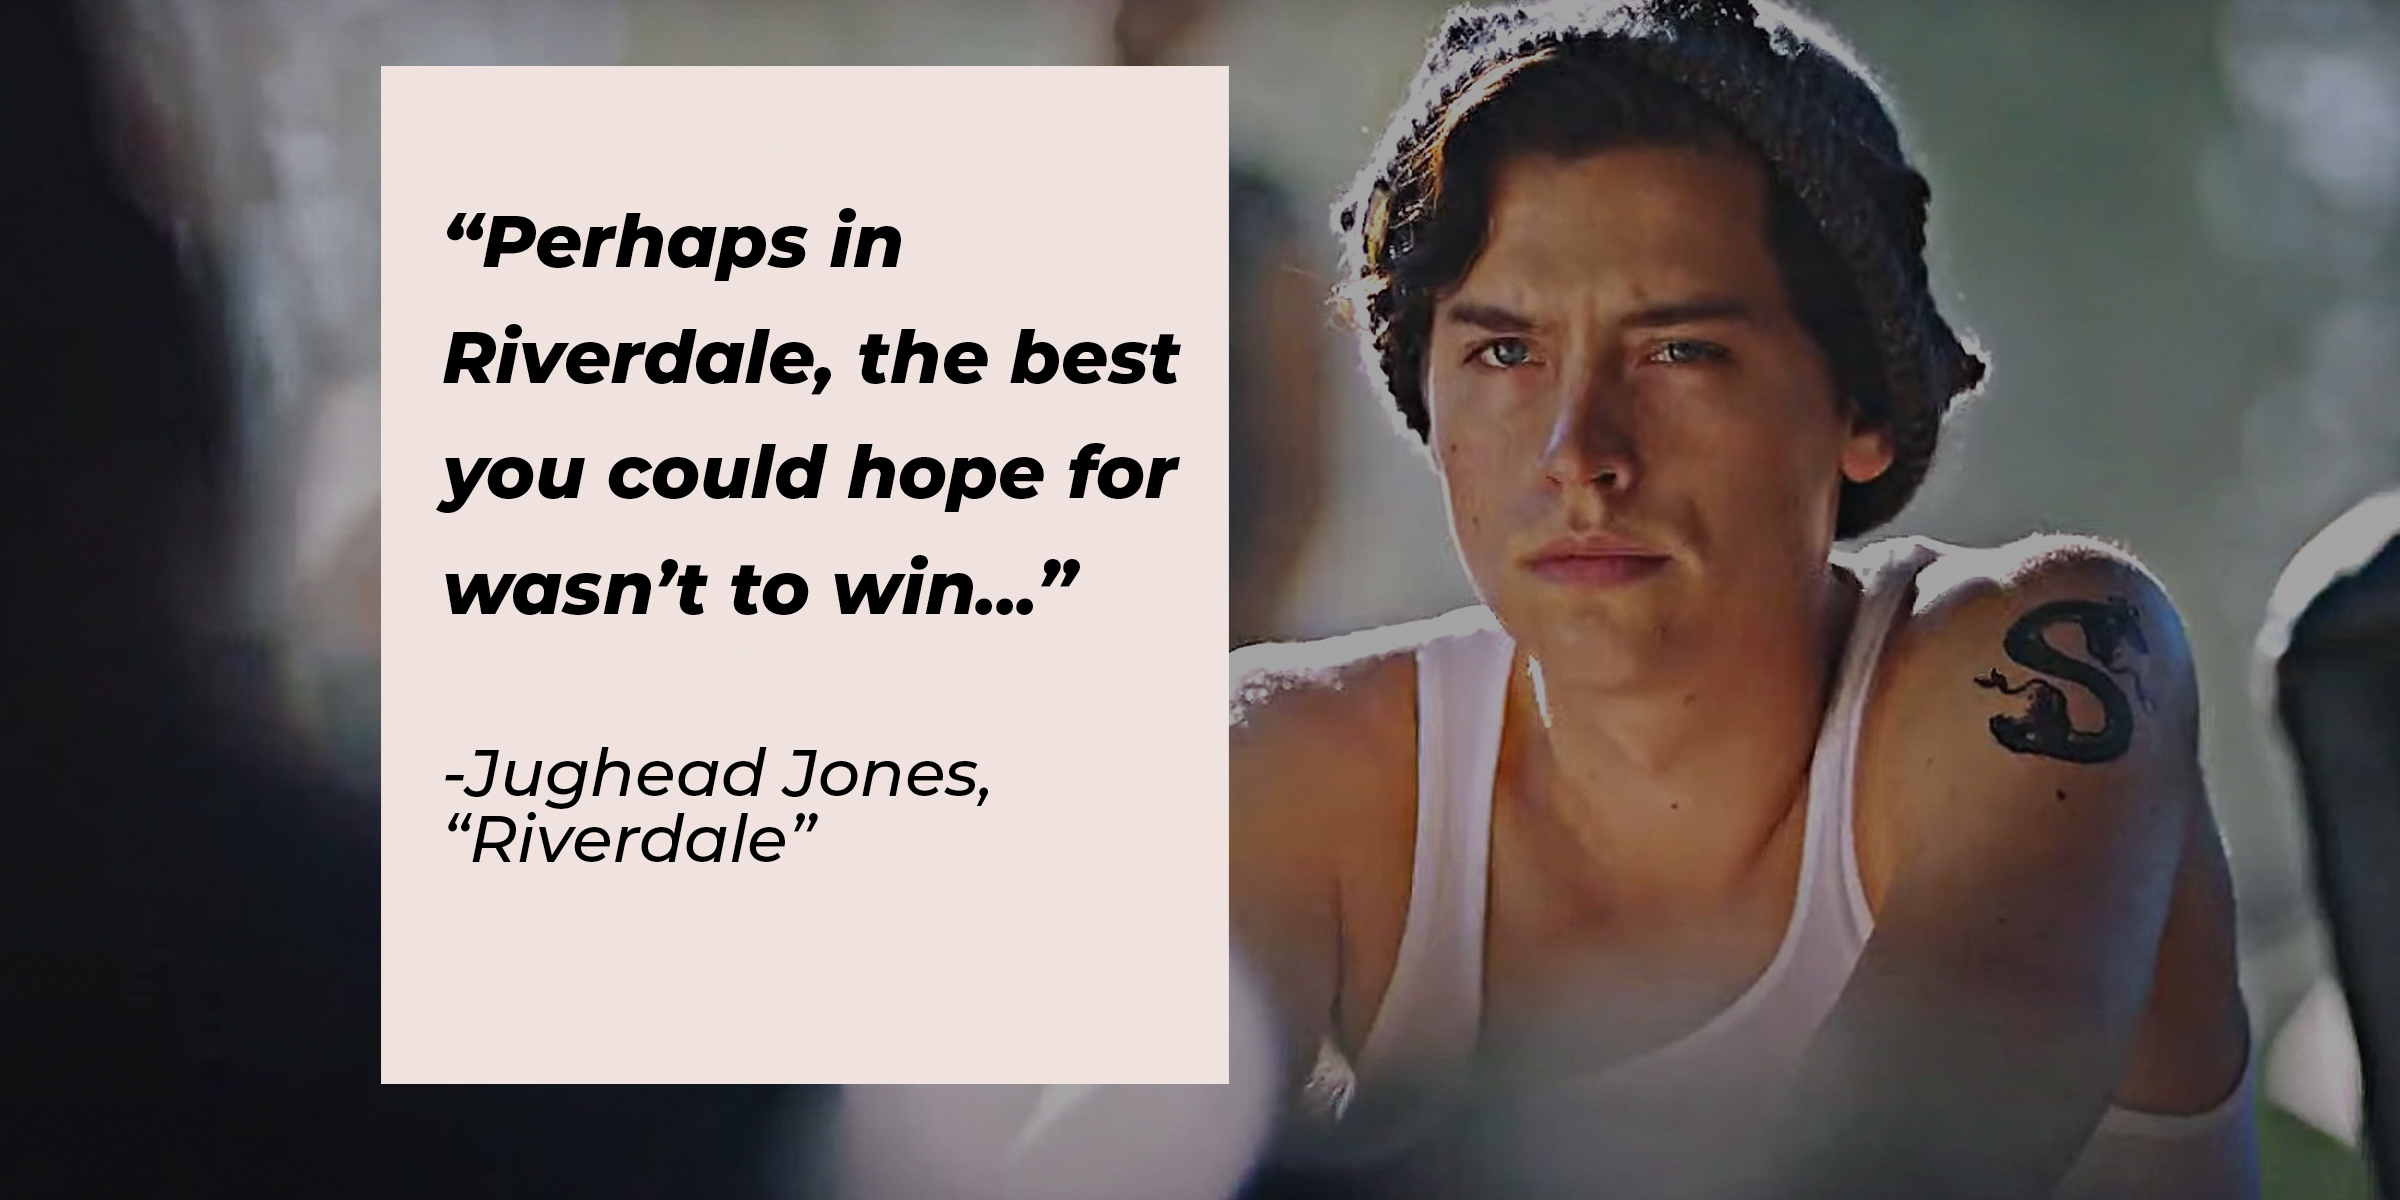 Image of Cole Sprouse as Jughead on "Riverdale" with the quote: “Perhaps in Riverdale, the best you could hope for wasn’t to win...” | Source: facebook.com/Riverdale